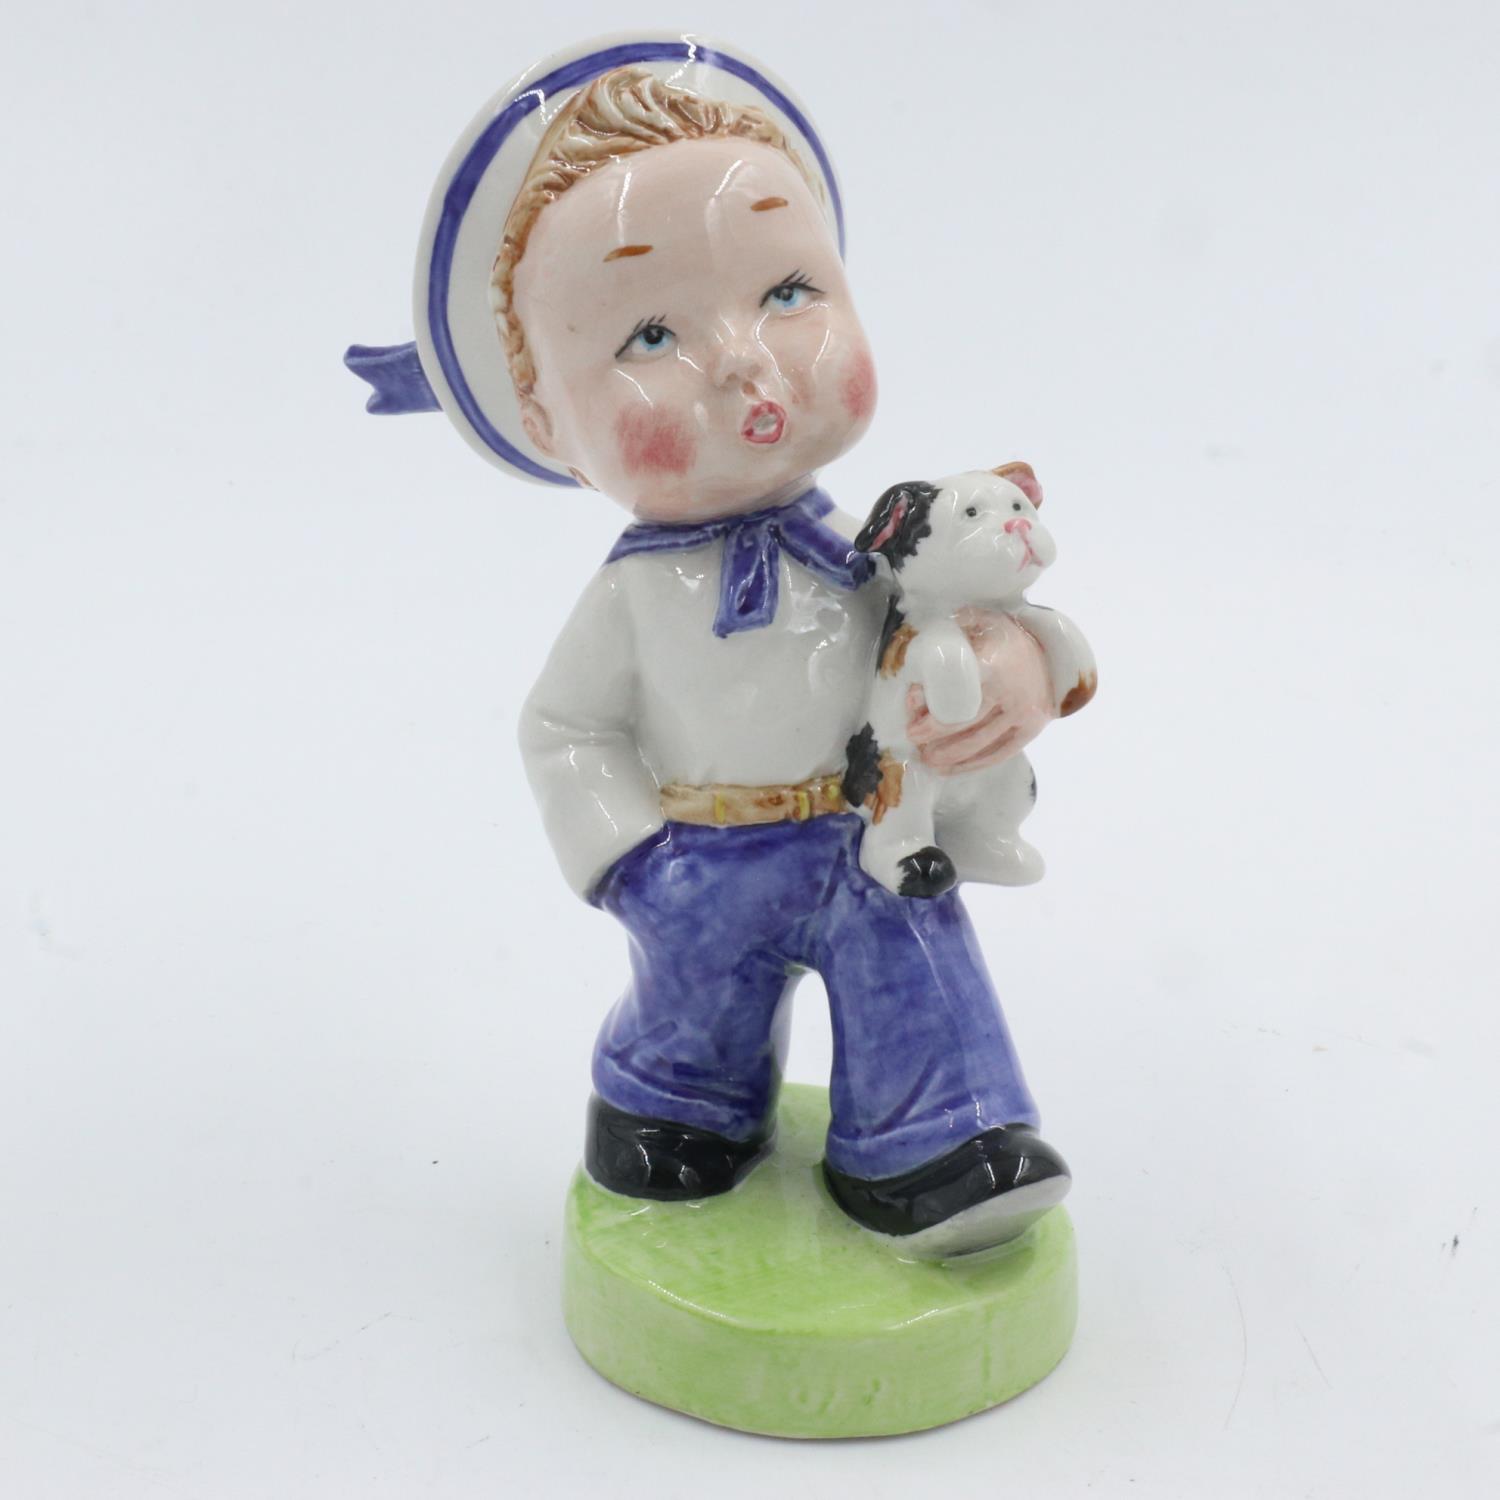 Lorna Bailey Sailor Boy figurine, H: 15 cm. UK P&P Group 1 (£16+VAT for the first lot and £2+VAT for